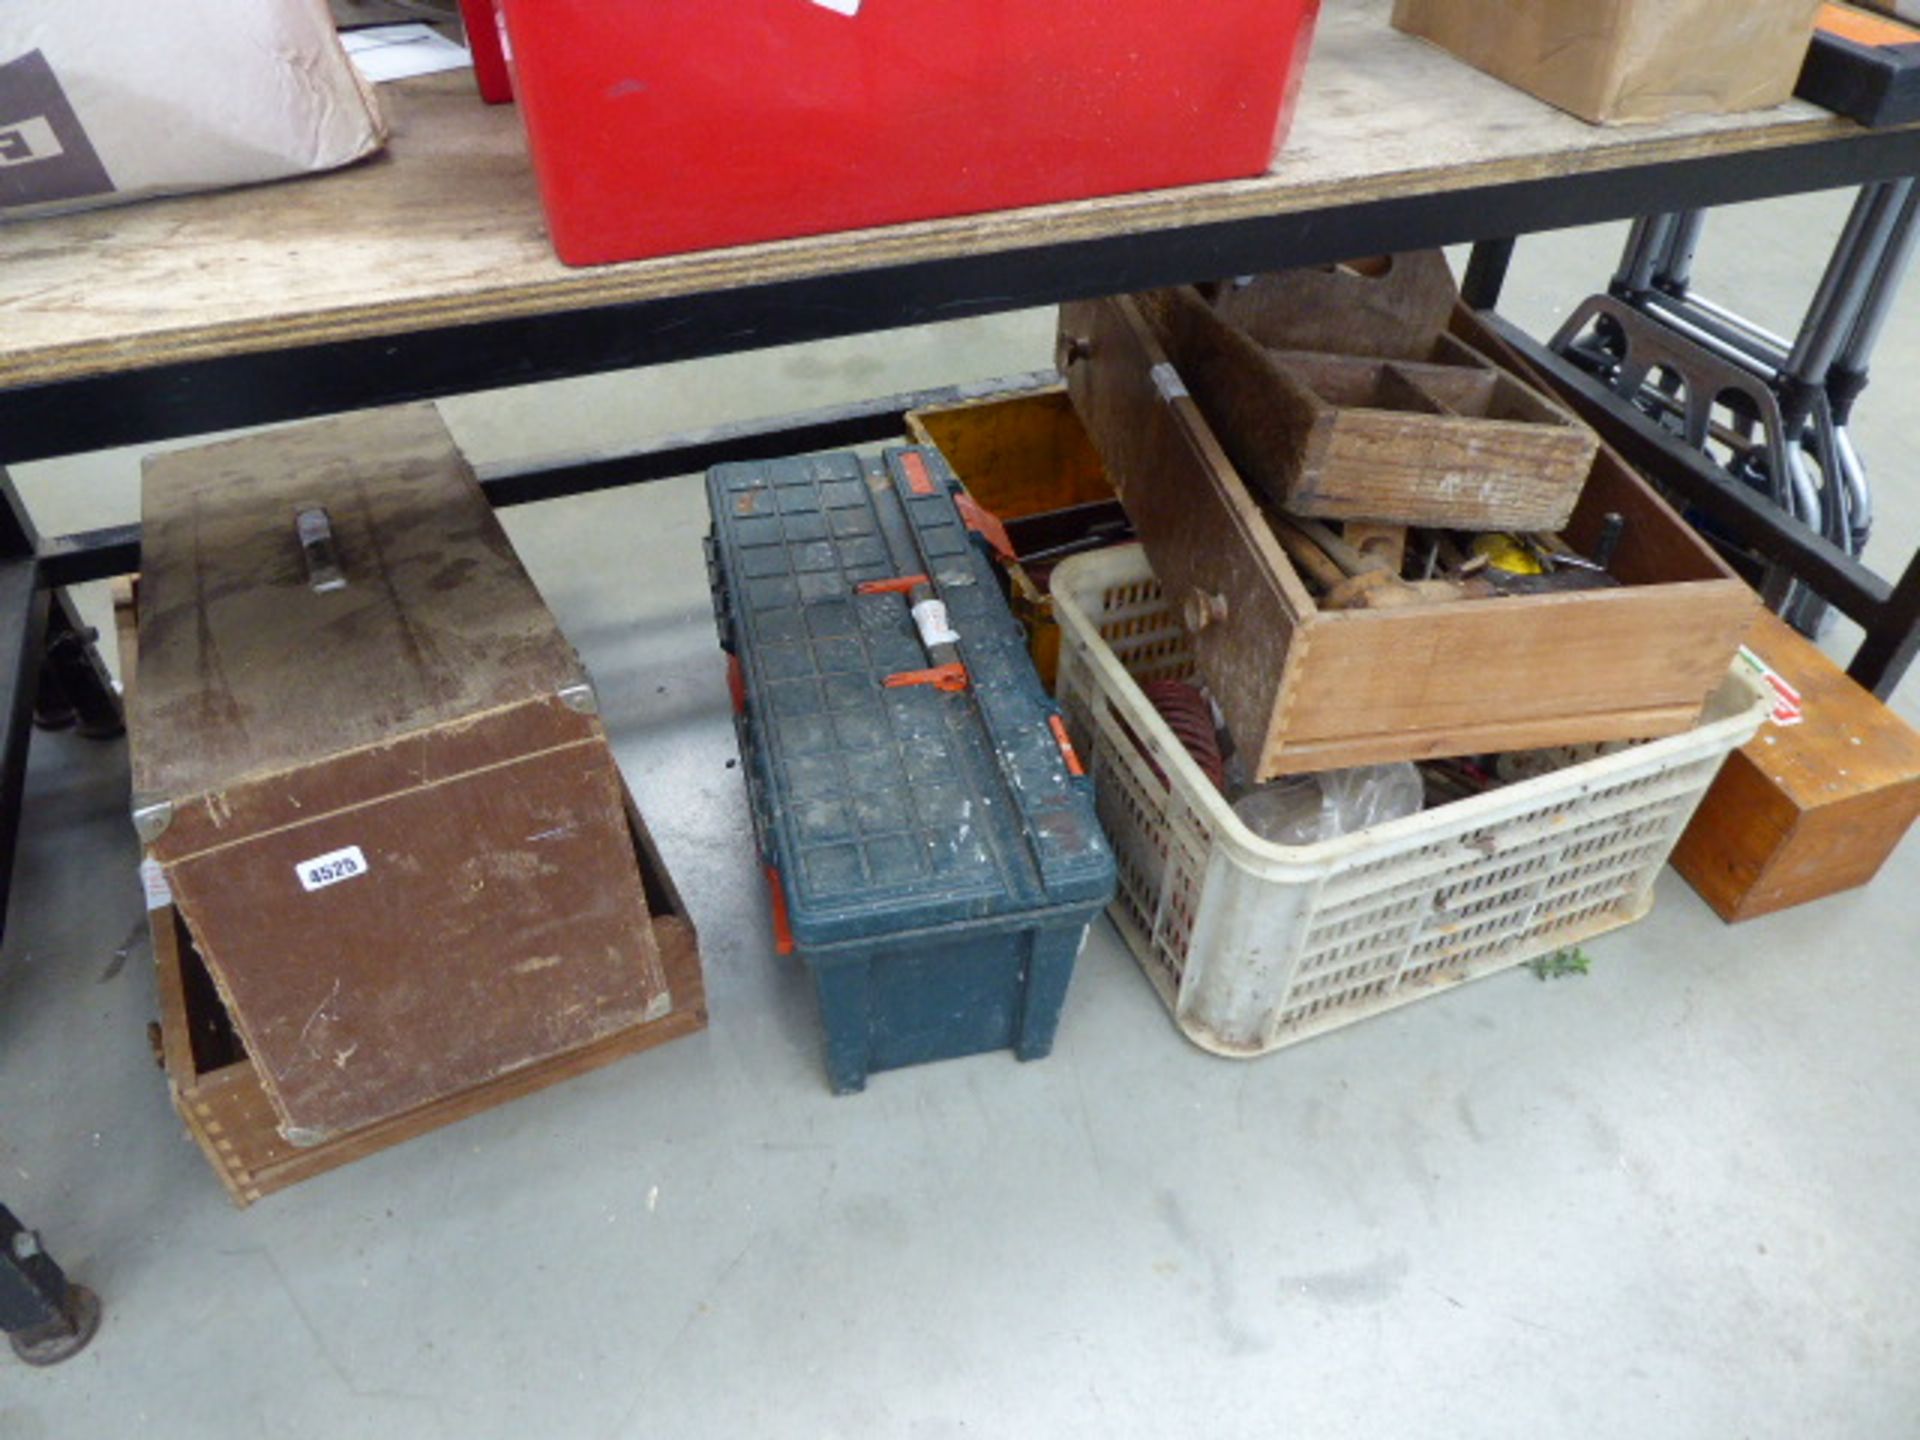 Large bay of assorted tools including hammers, chisels, drill bits, wooden boxes etc